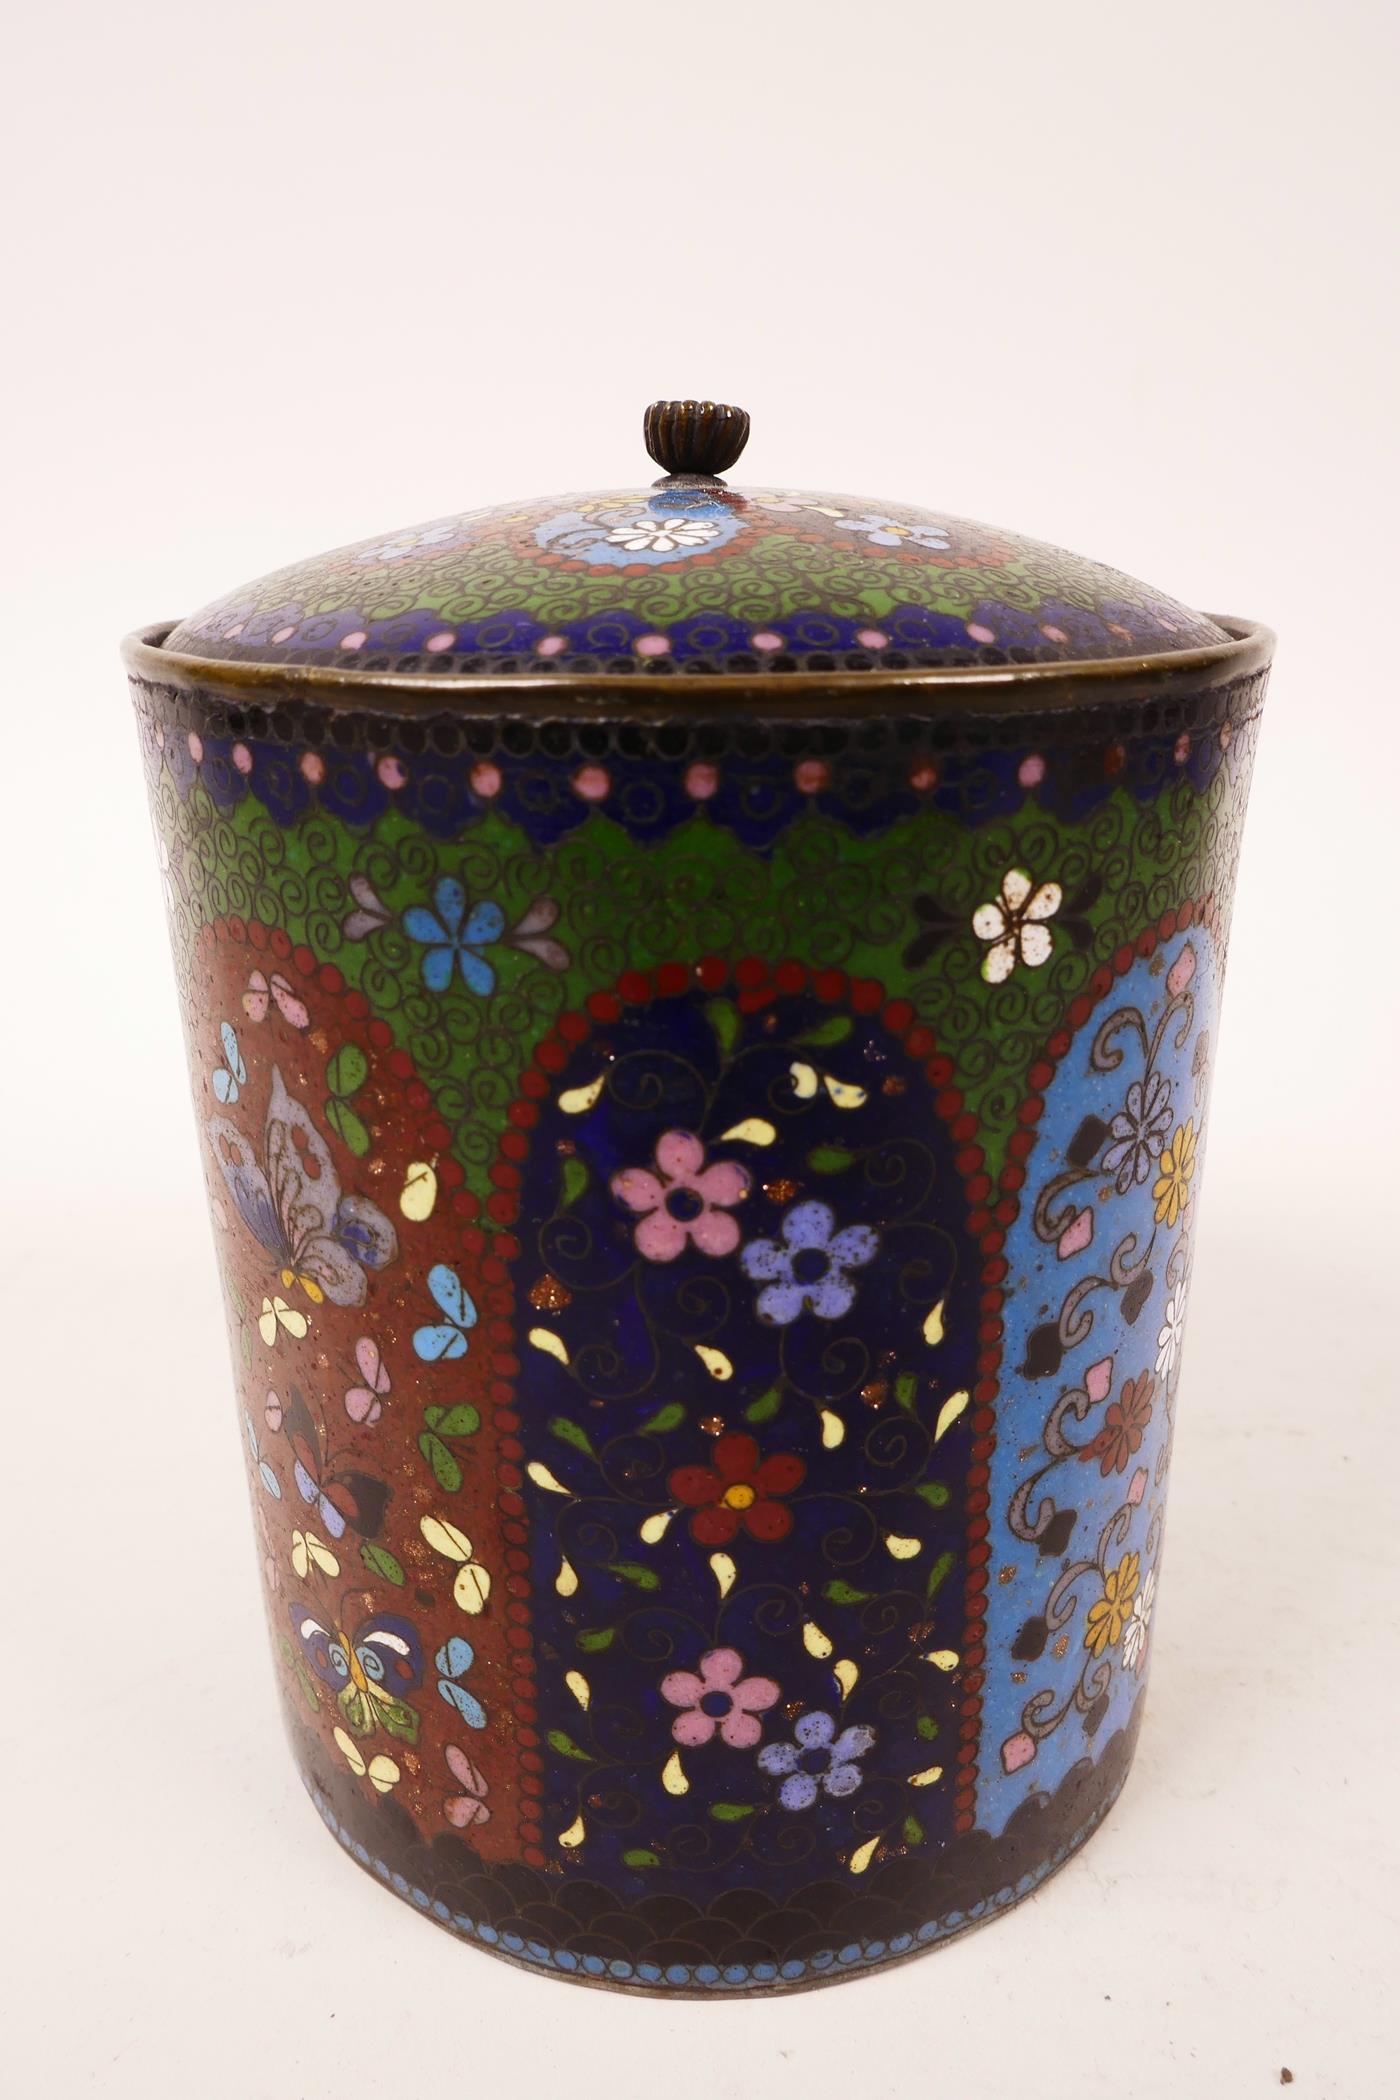 A cloisonne jar and cover, 5" high